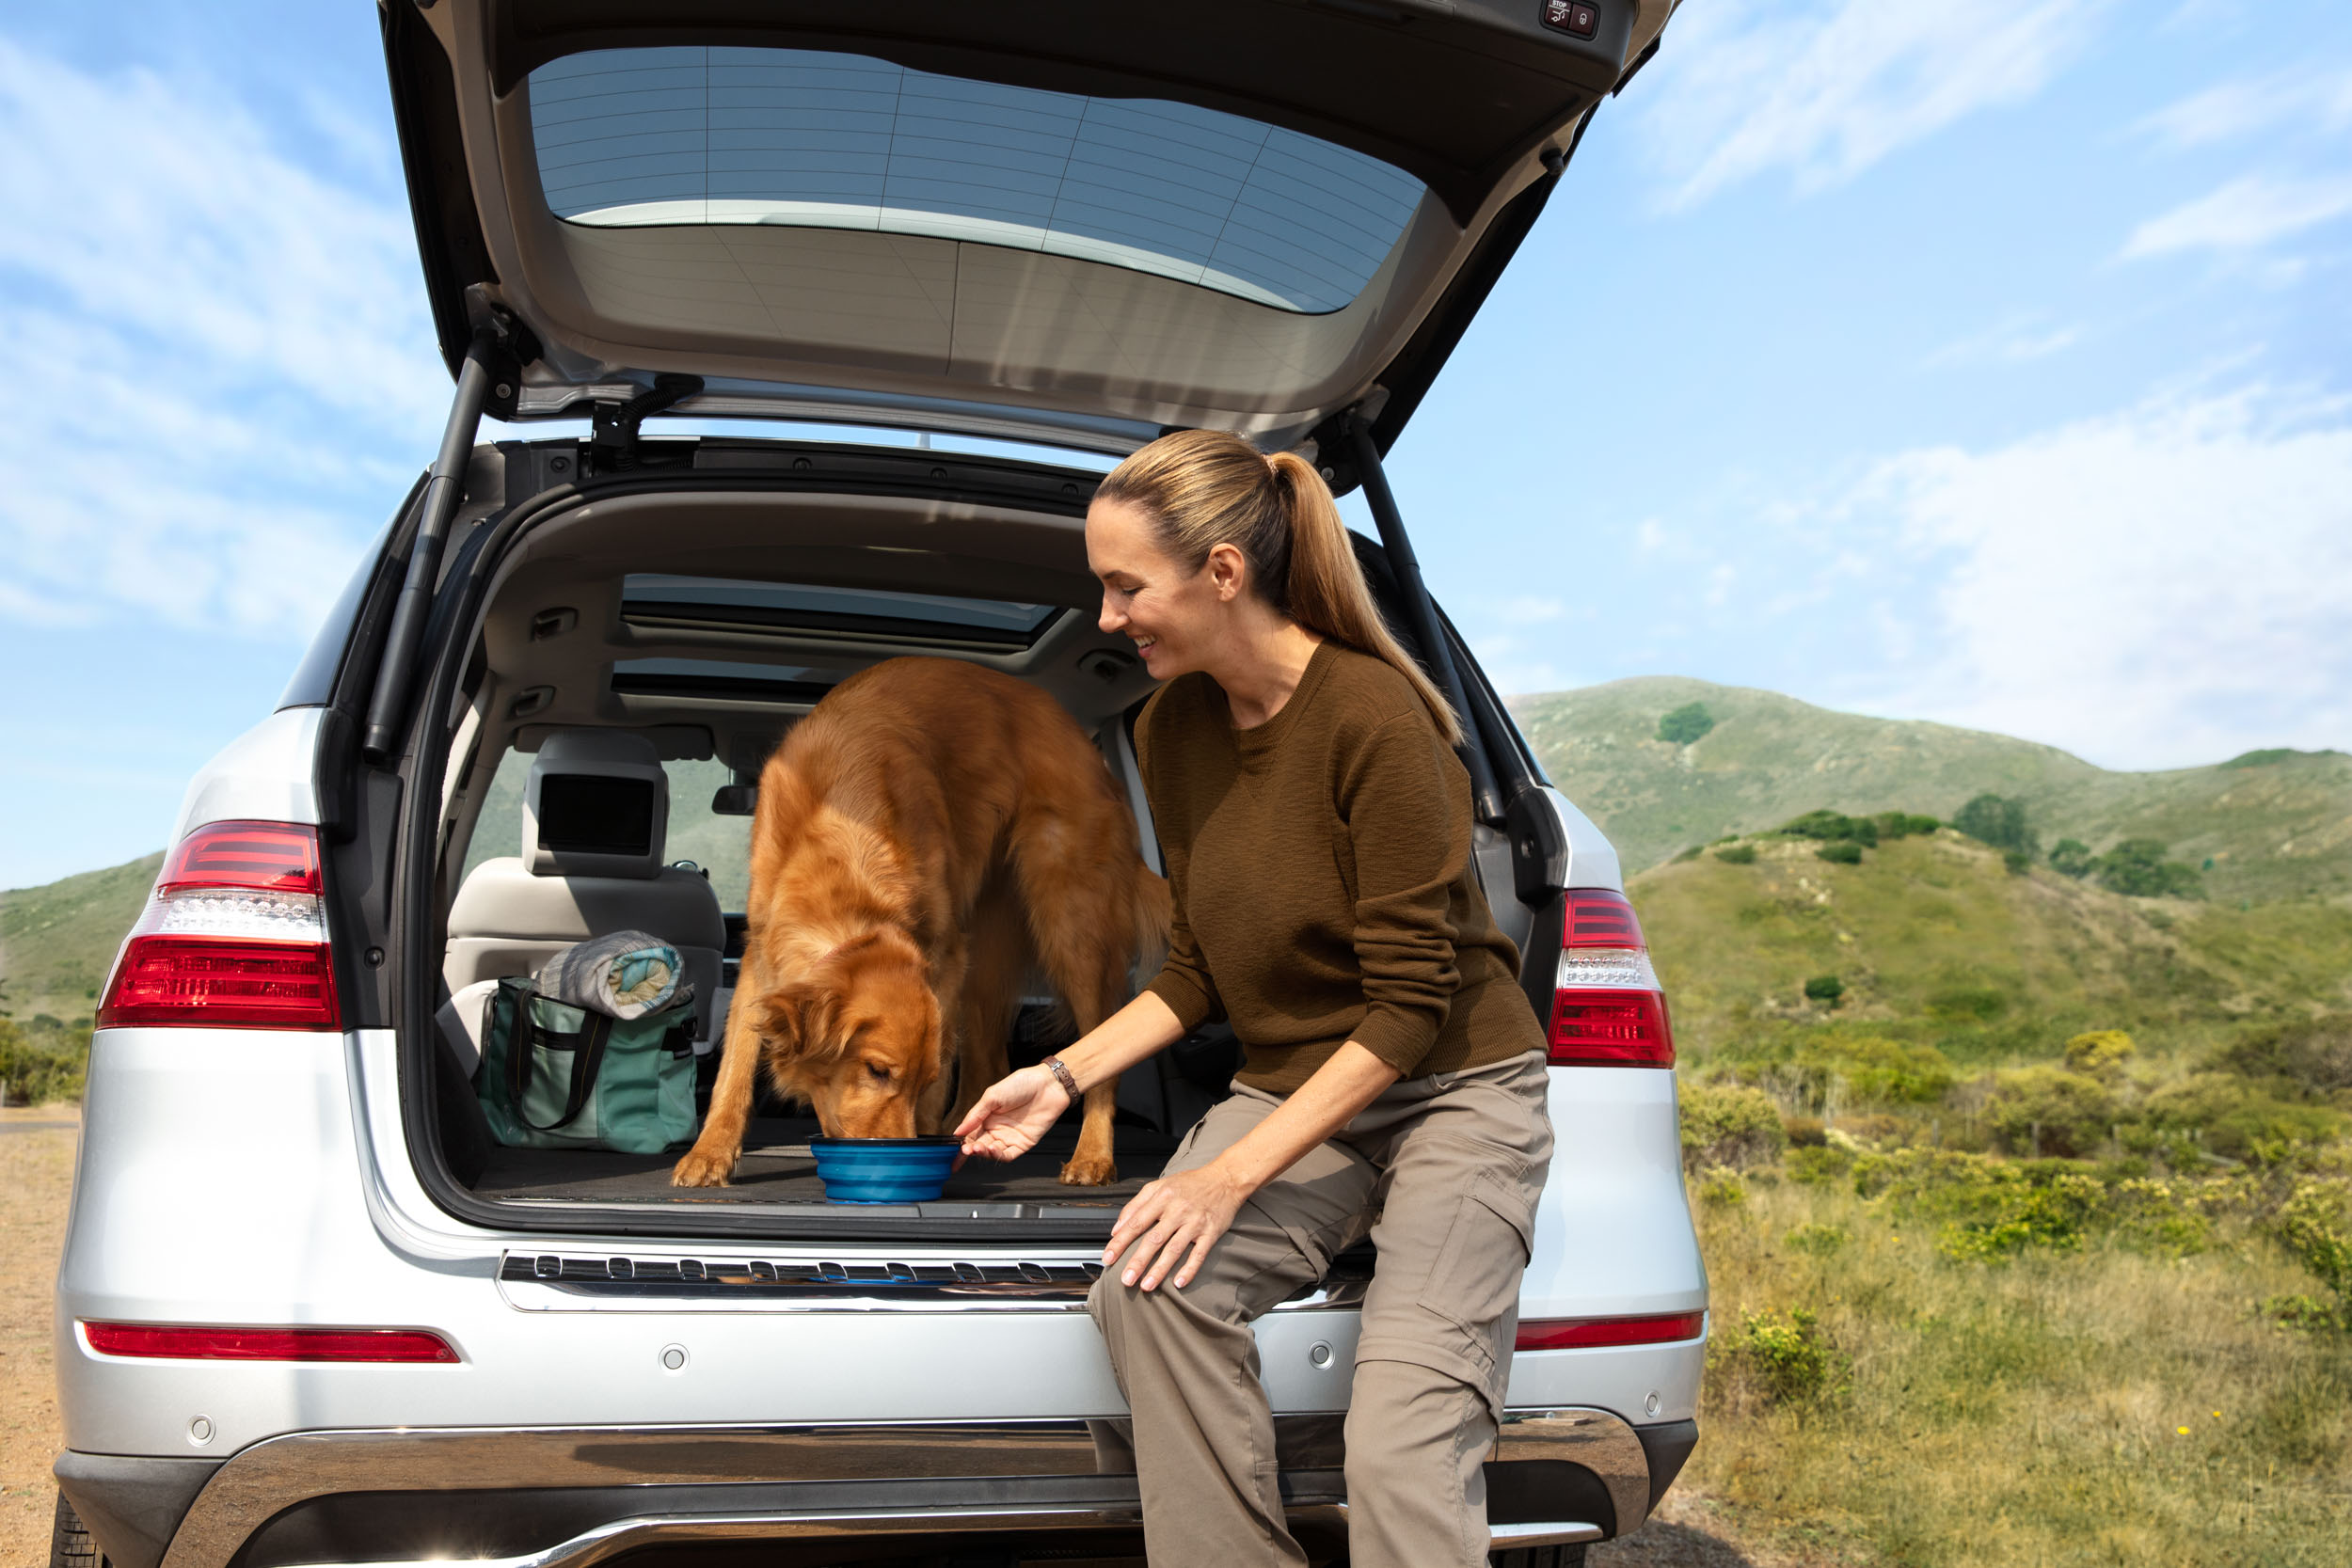 People and Pet Photography | Woman Feeding Dog in SUV by Mark Rogers